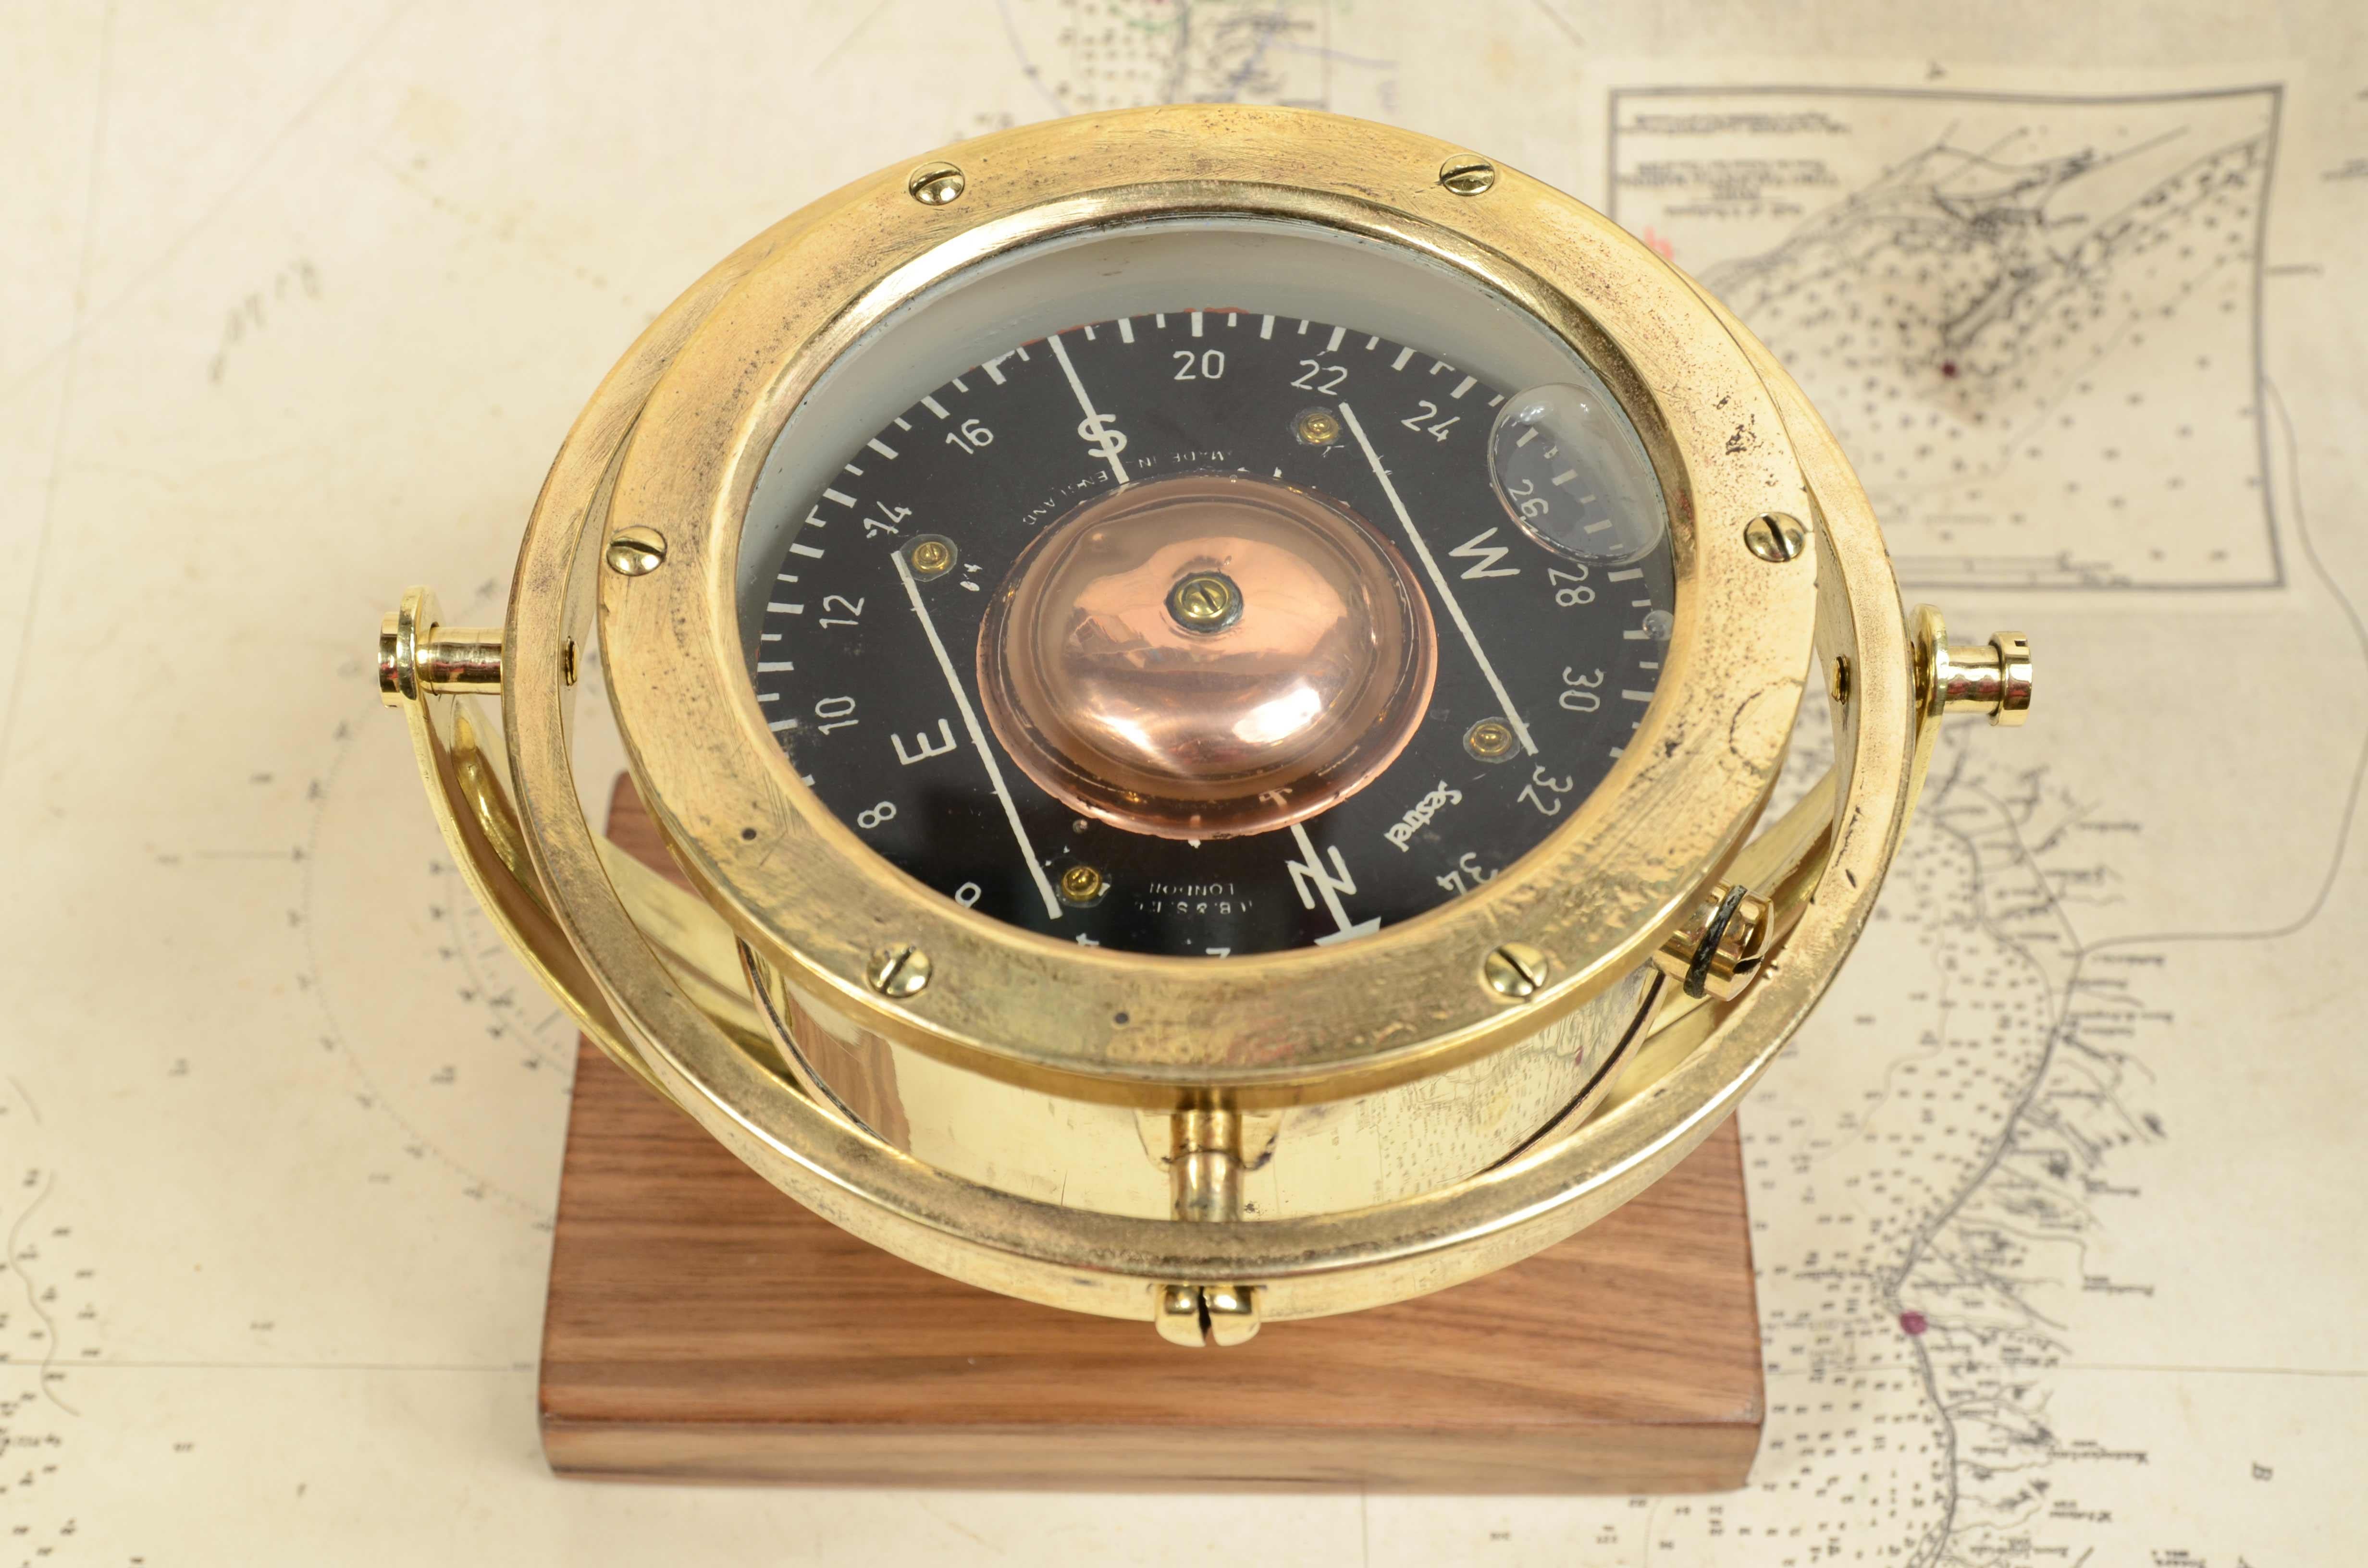 Aeronautical compass signed Henry Browne & Son Ltd Sestrel of the 1930s, no. C 8928 brass and glass, mounted on custom-made walnut and brass board. Excellent fully functional condition. Compass diameter cm 13.5 - 5.6 inch, board width cm 16 - 6.3